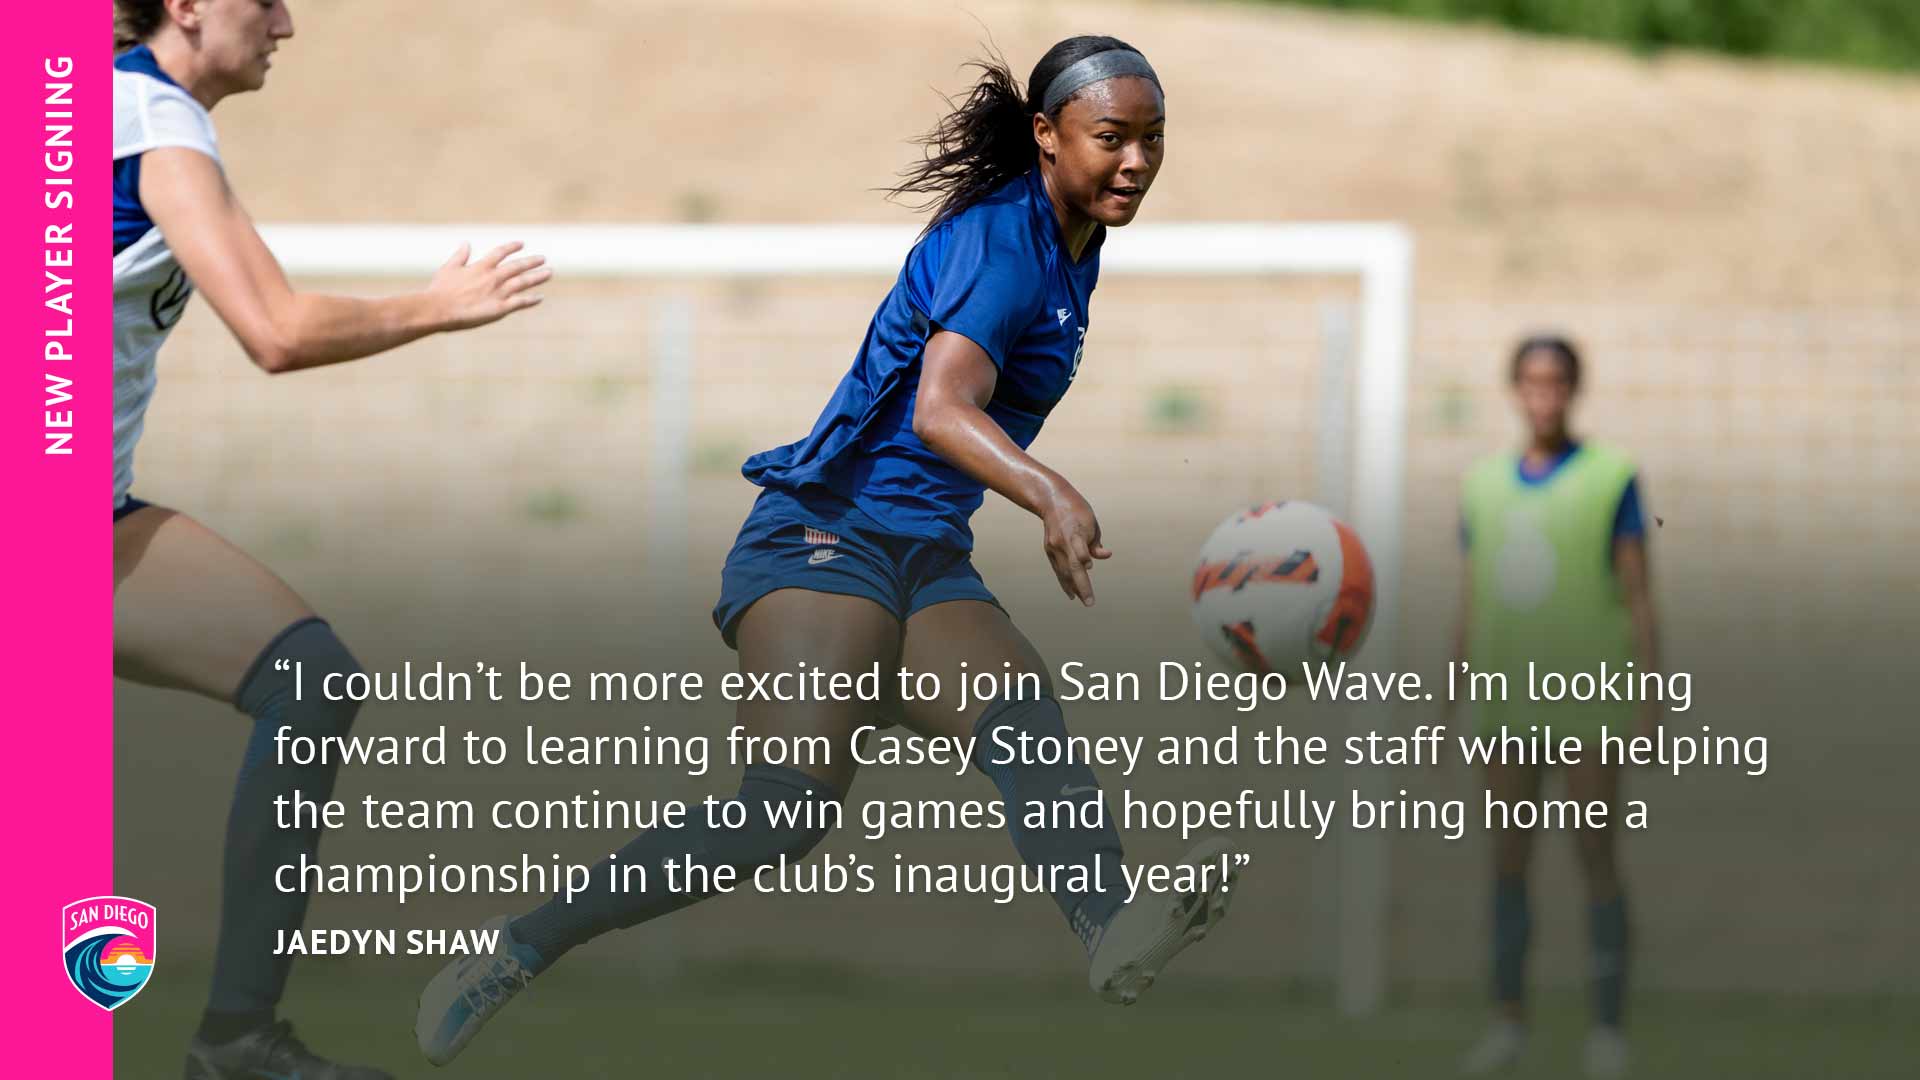 WAVE FC SIGNS THREE NATIONAL TEAM REPLACEMENT PLAYERS